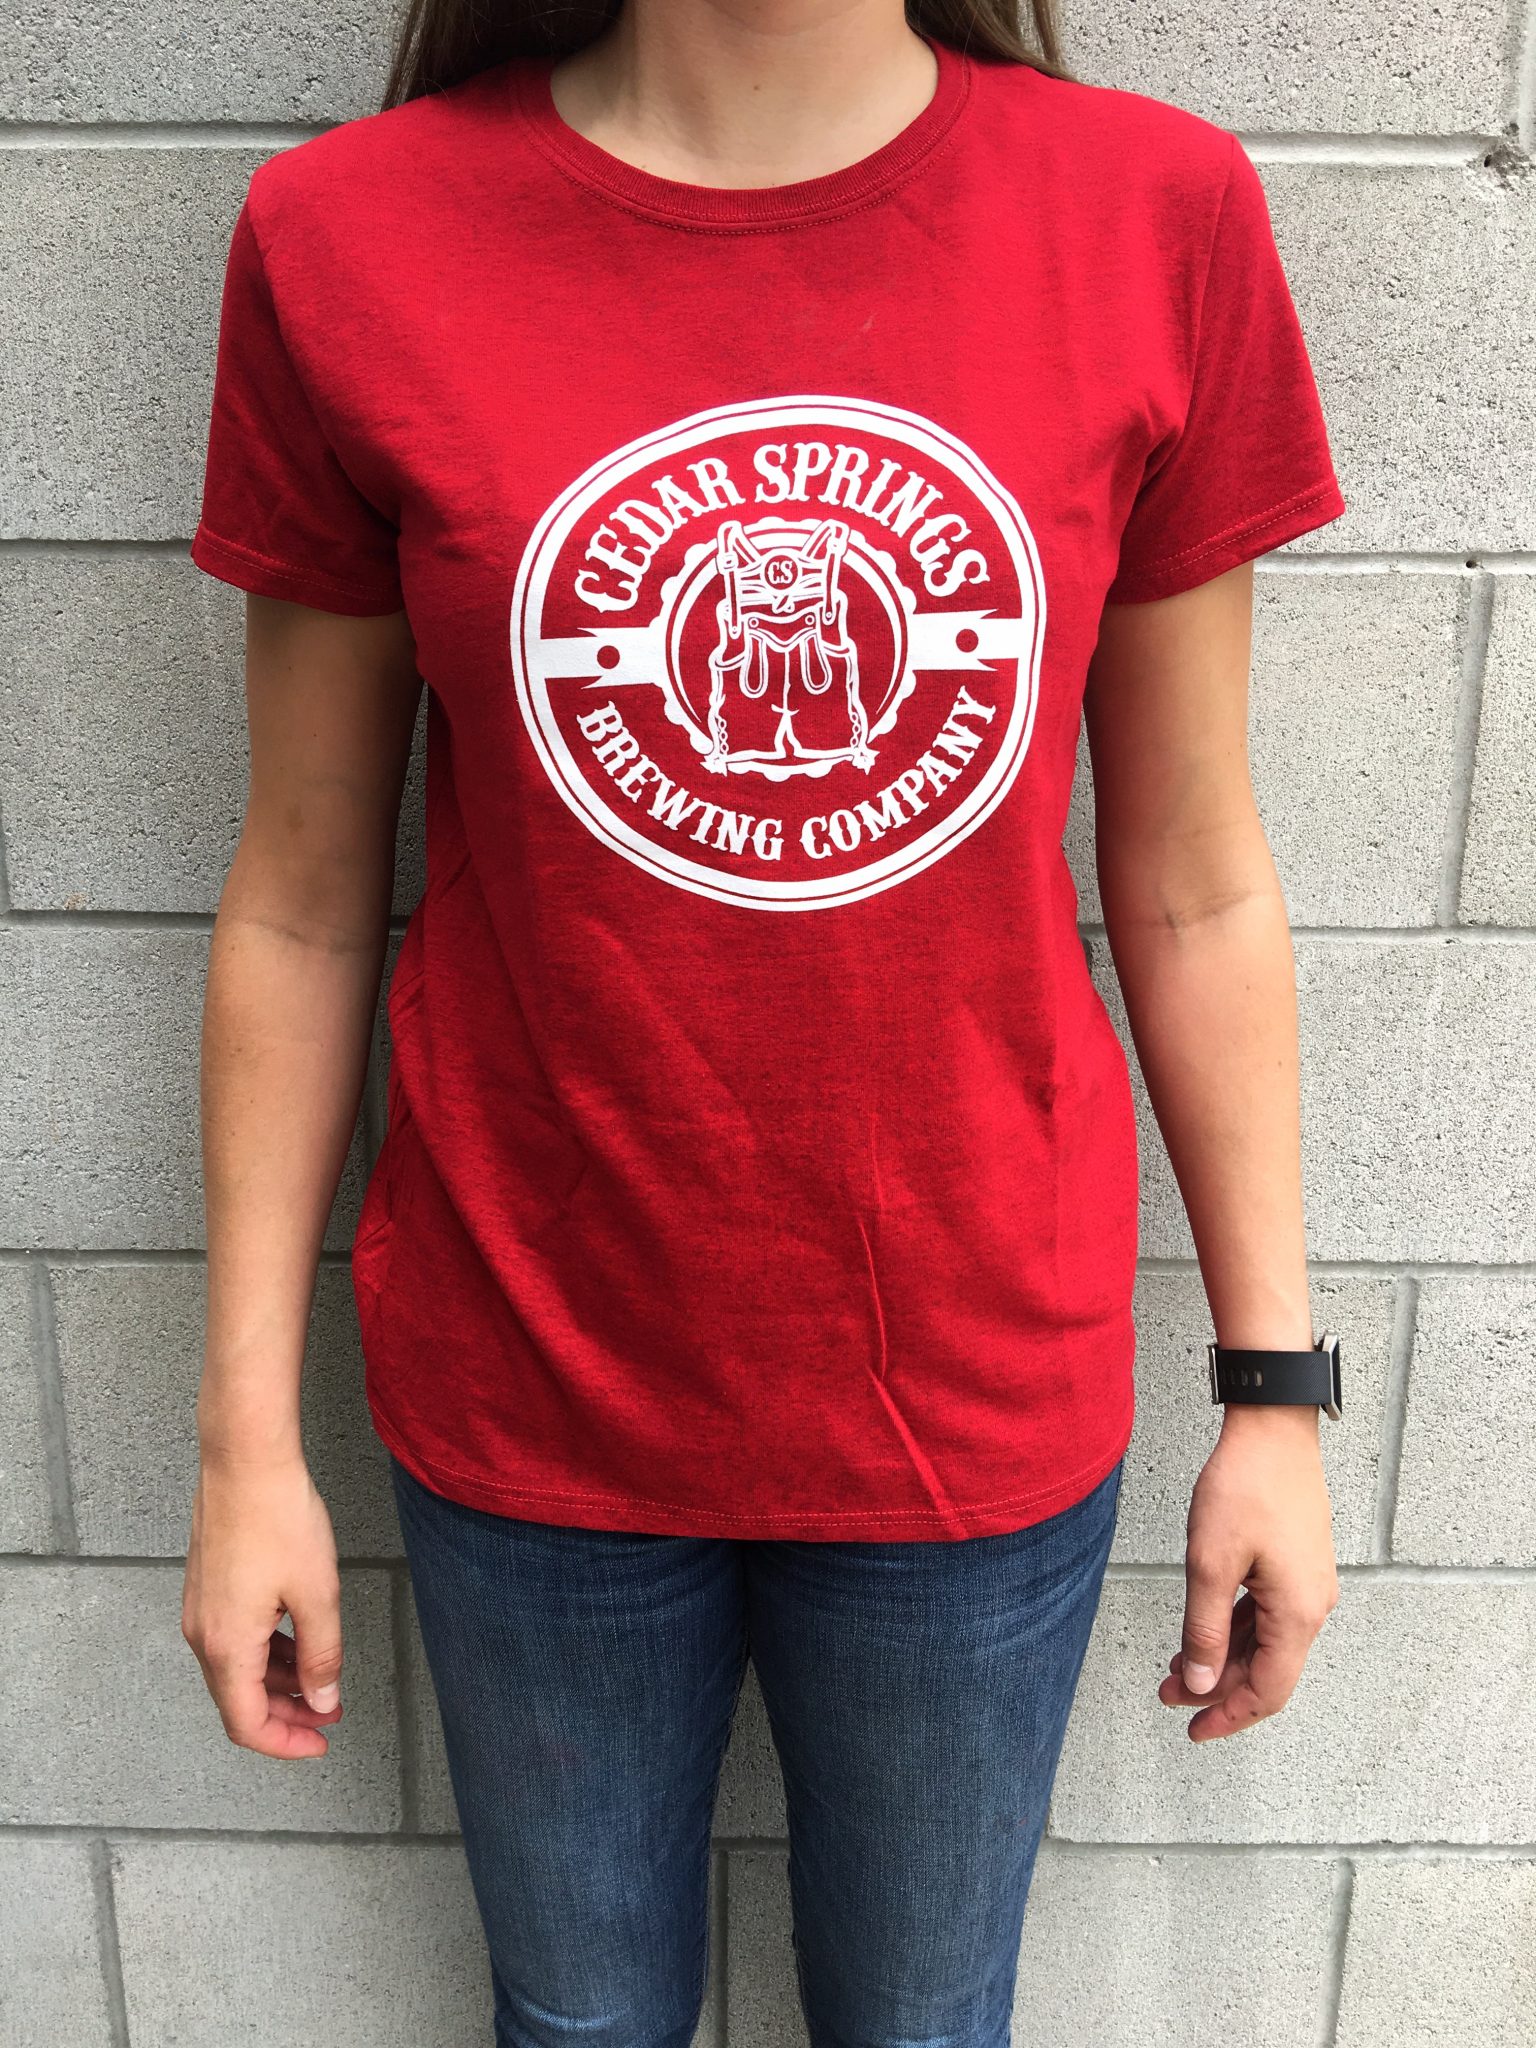 the red t shirt company